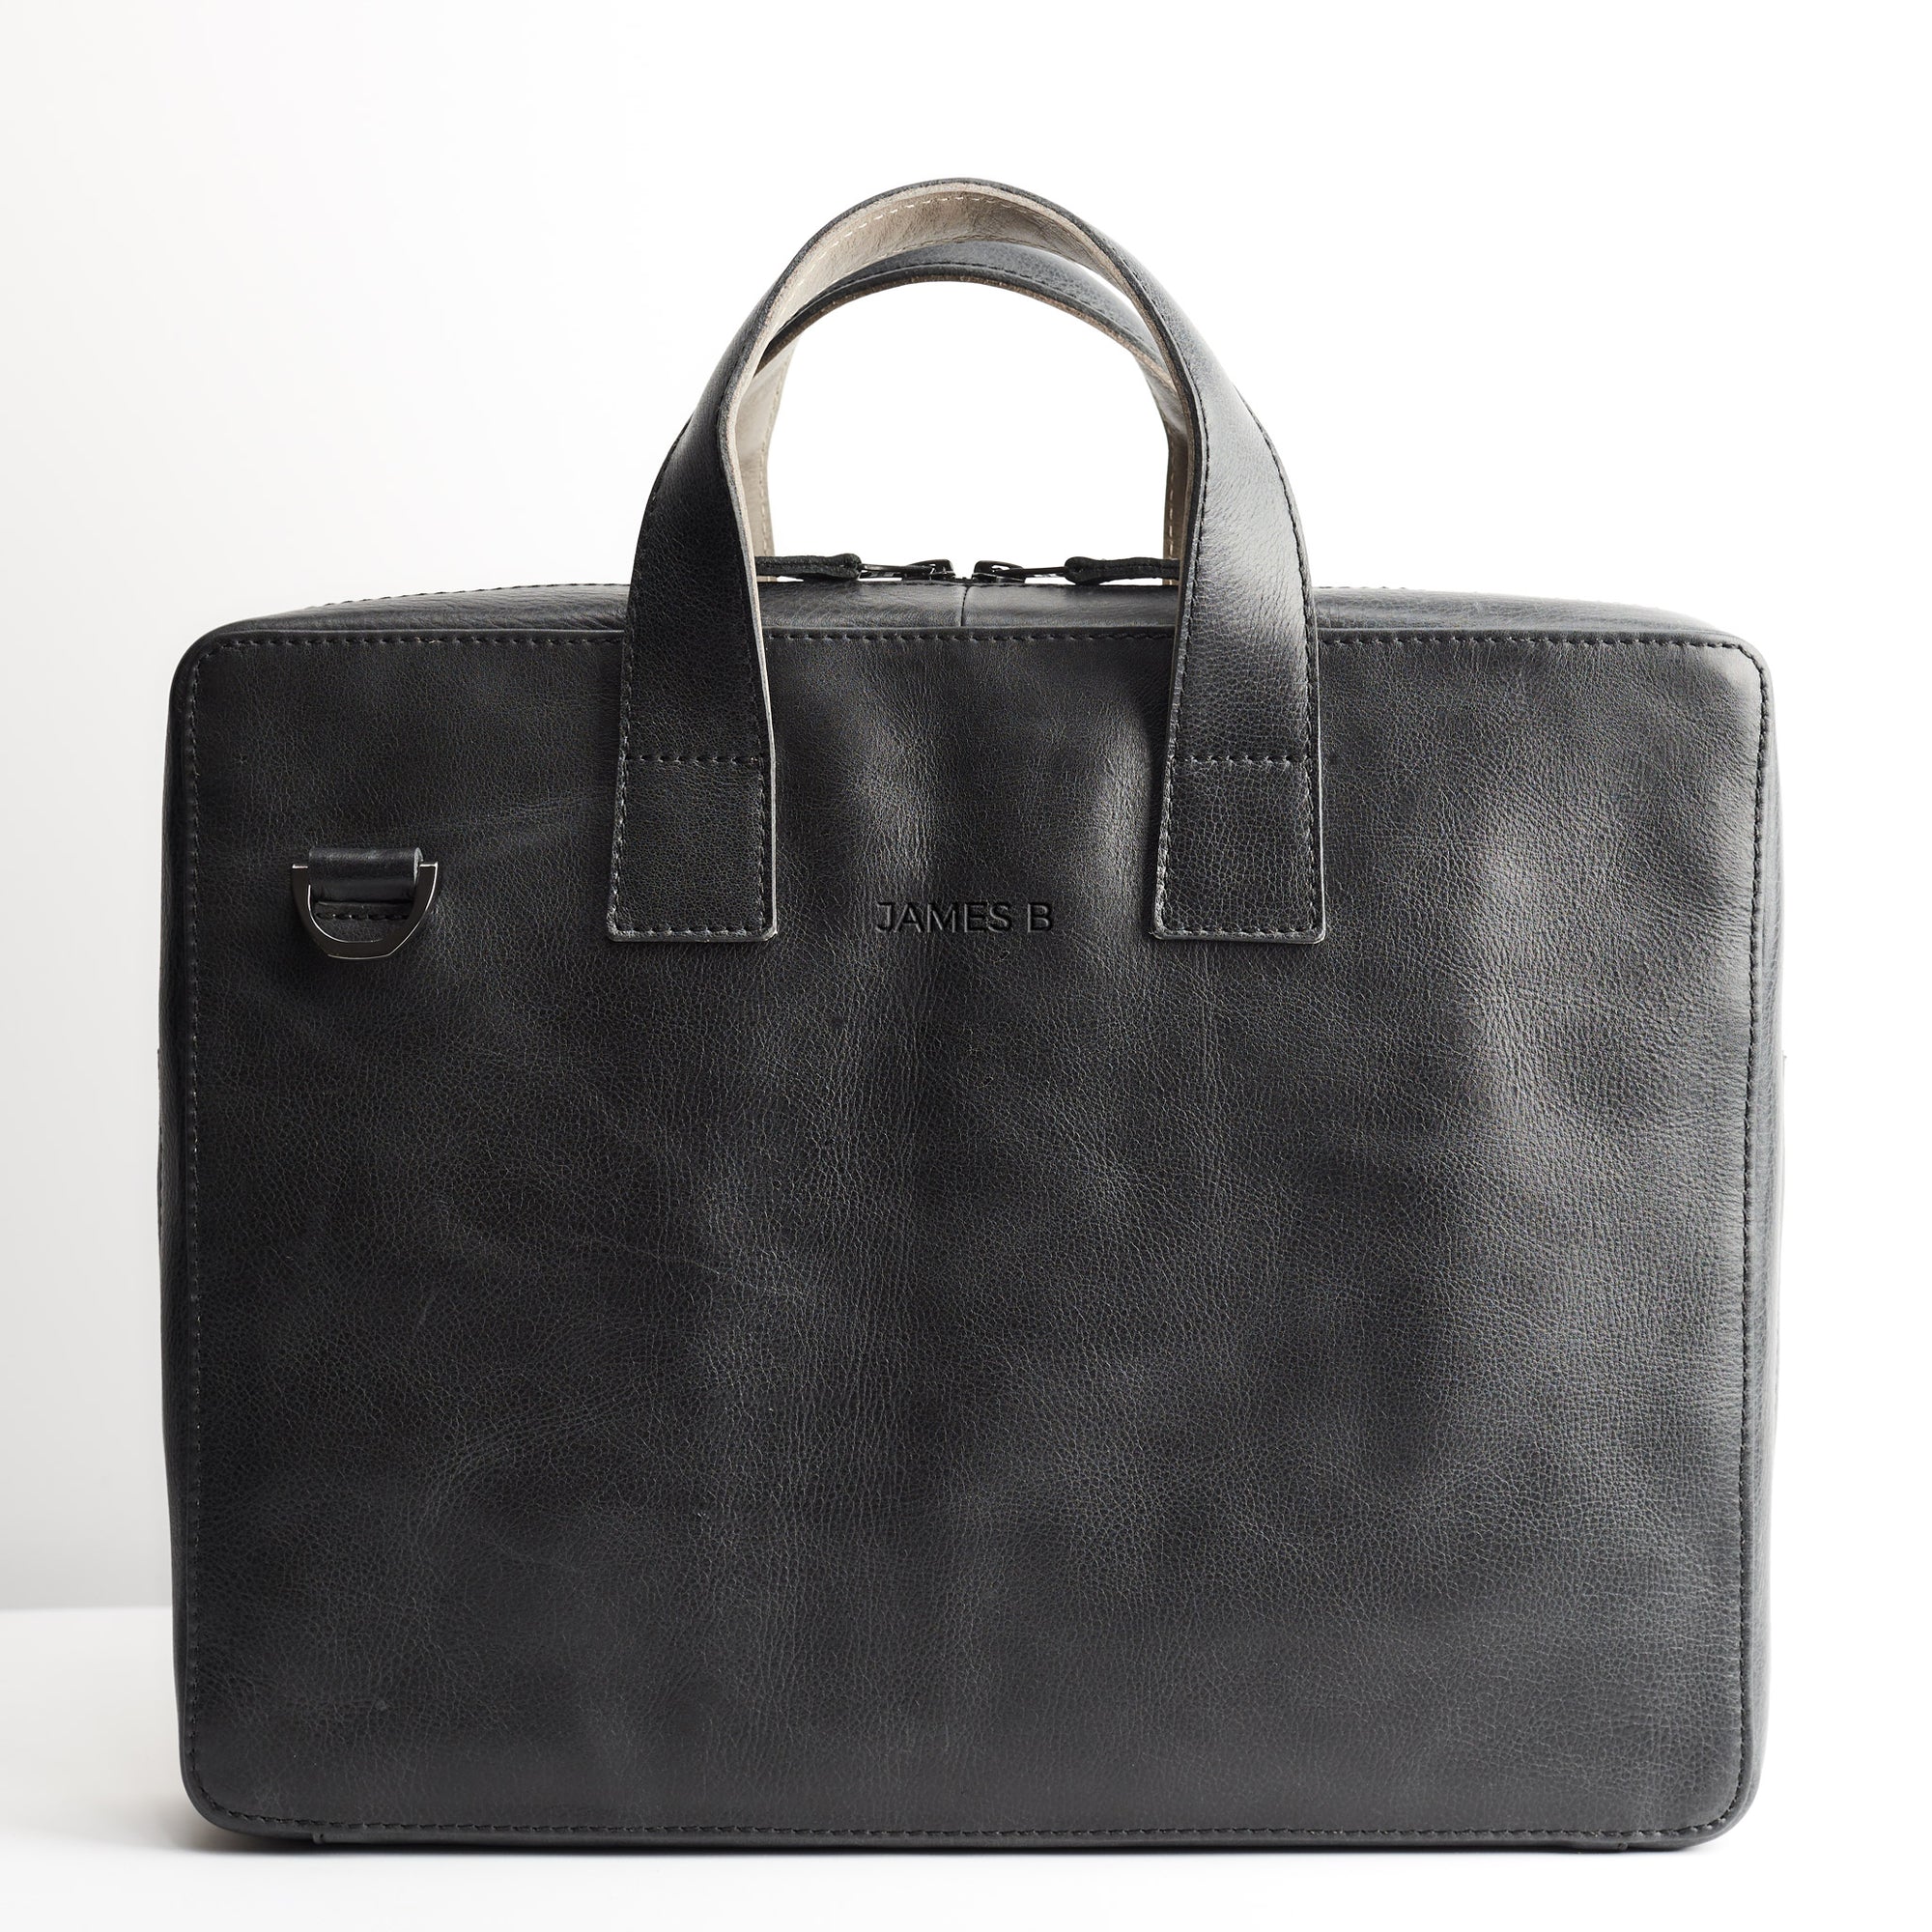 Custom engraving. Black leather soft briefcase, laptop 13 15 bag, work bag. Personalized gifts for men by Capra Leather